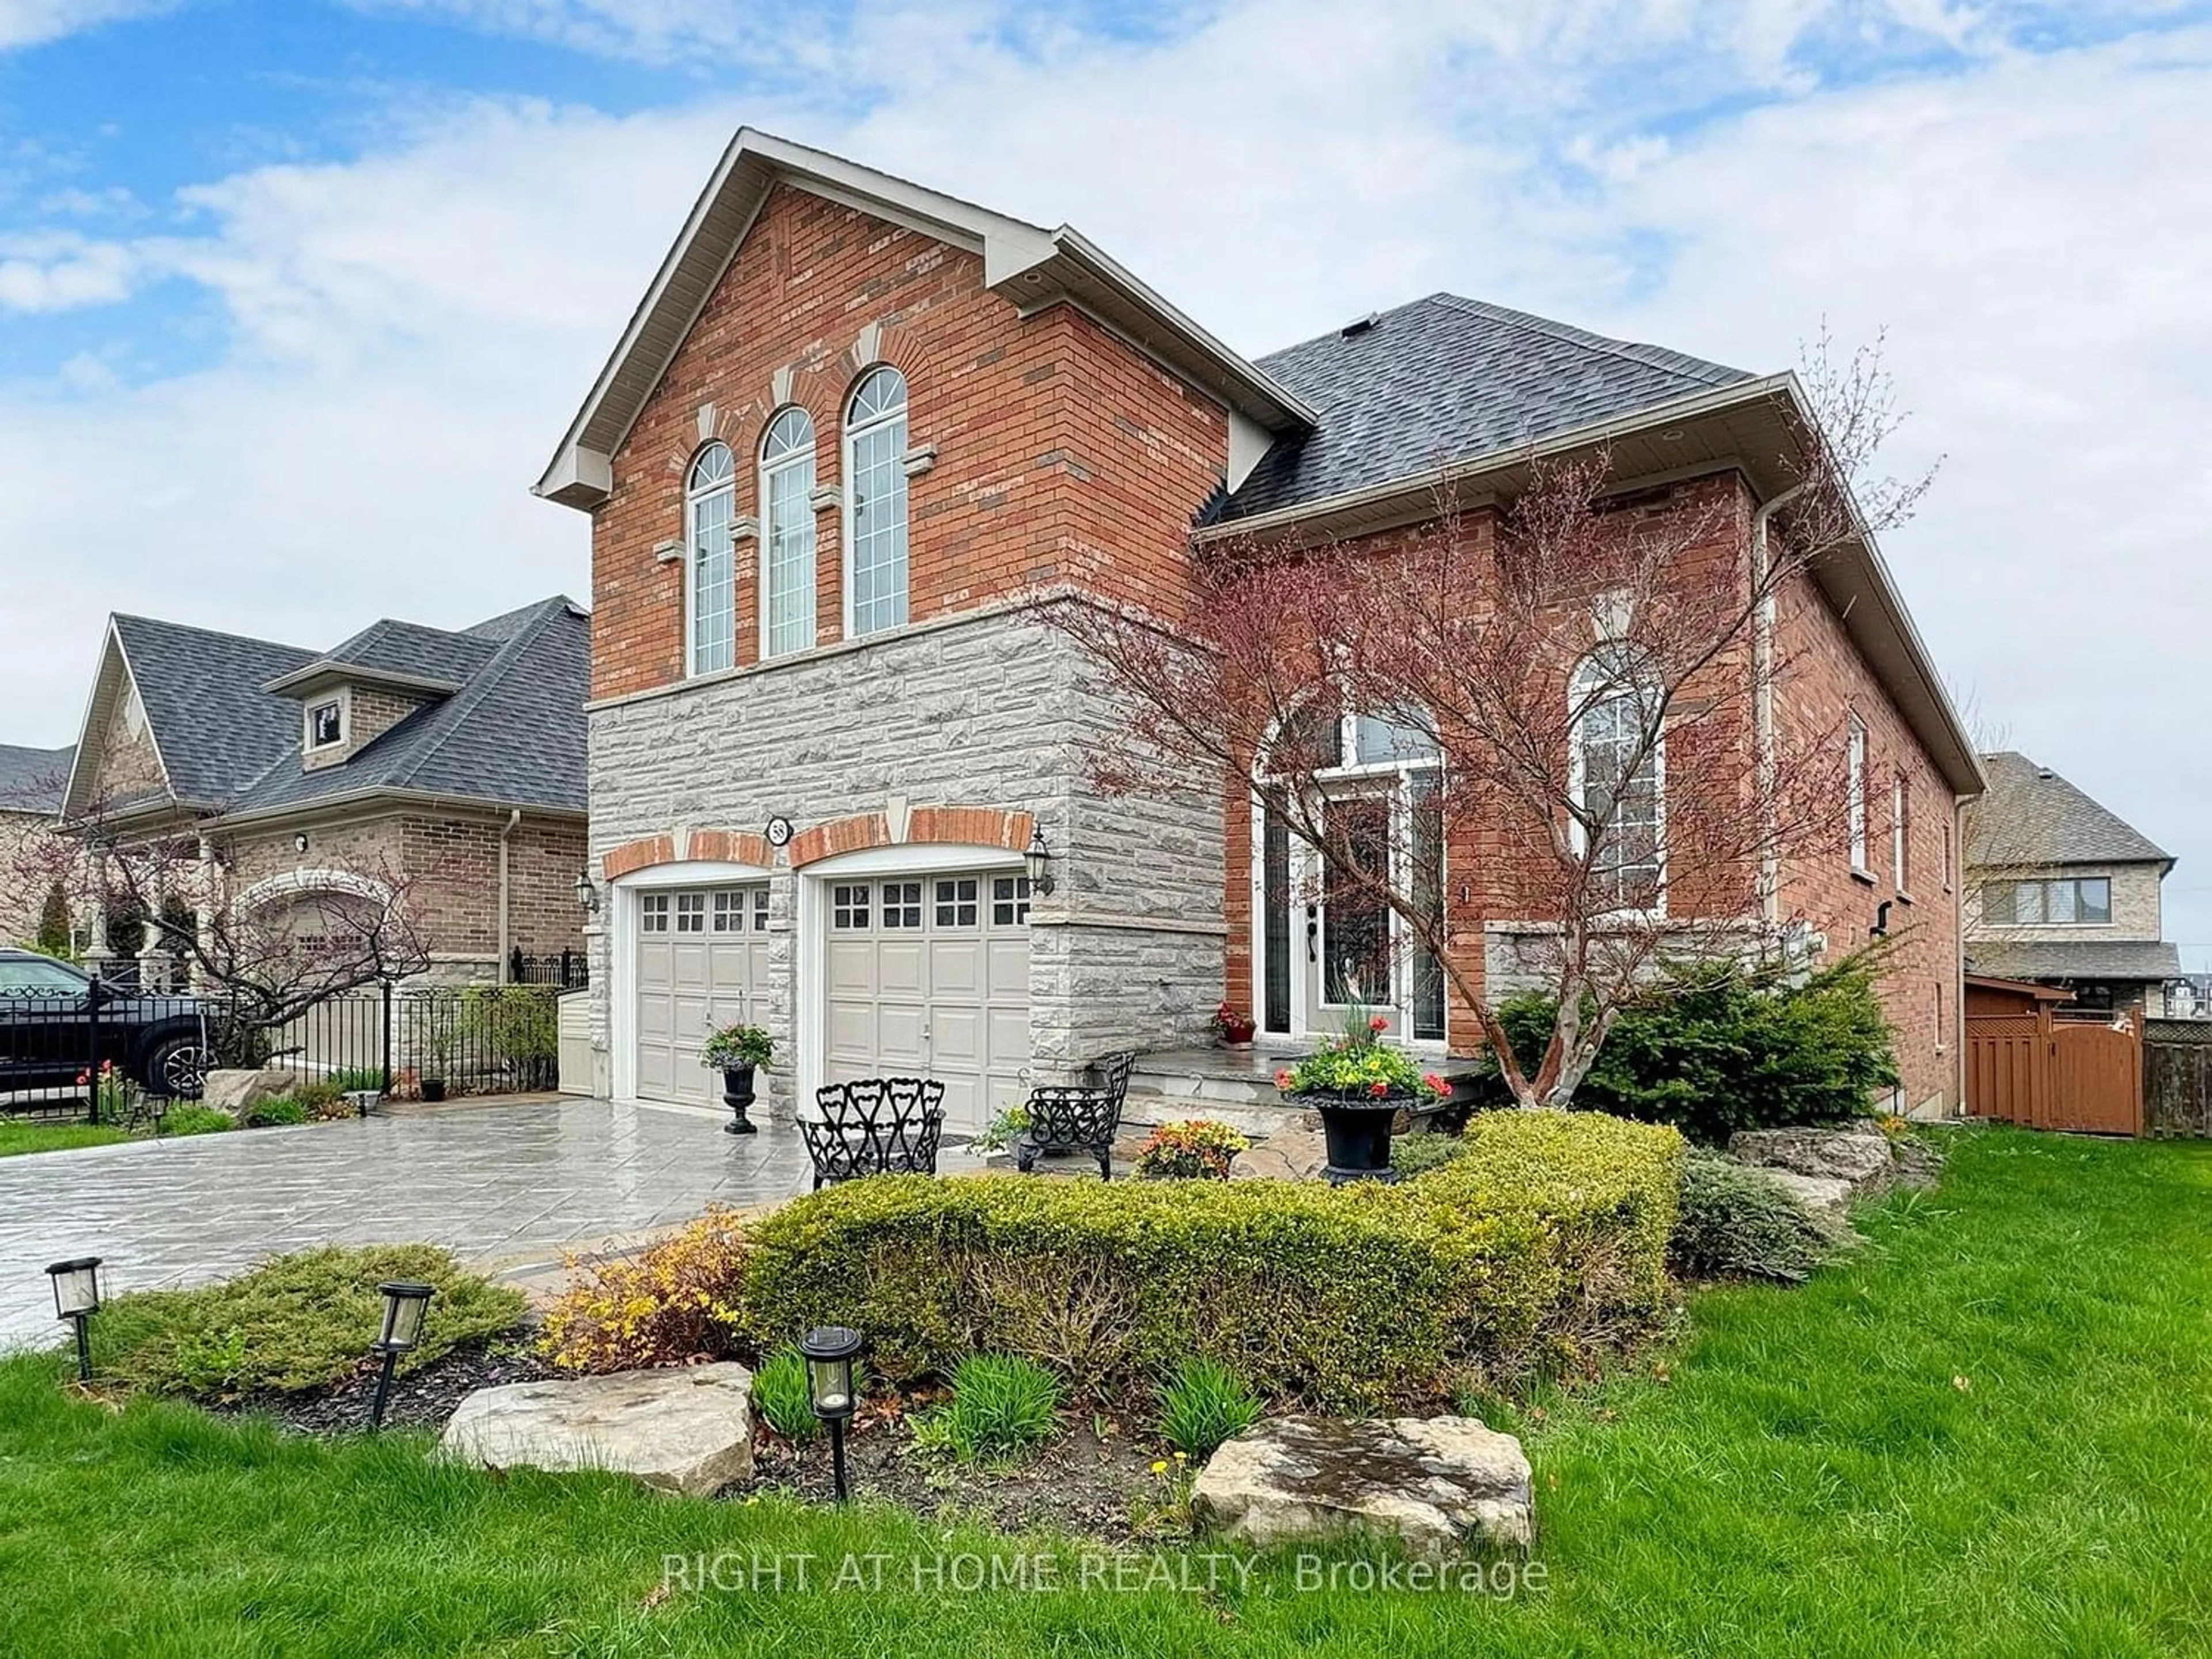 Home with brick exterior material for 58 Timber Valley Ave, Richmond Hill Ontario L4E 3S6